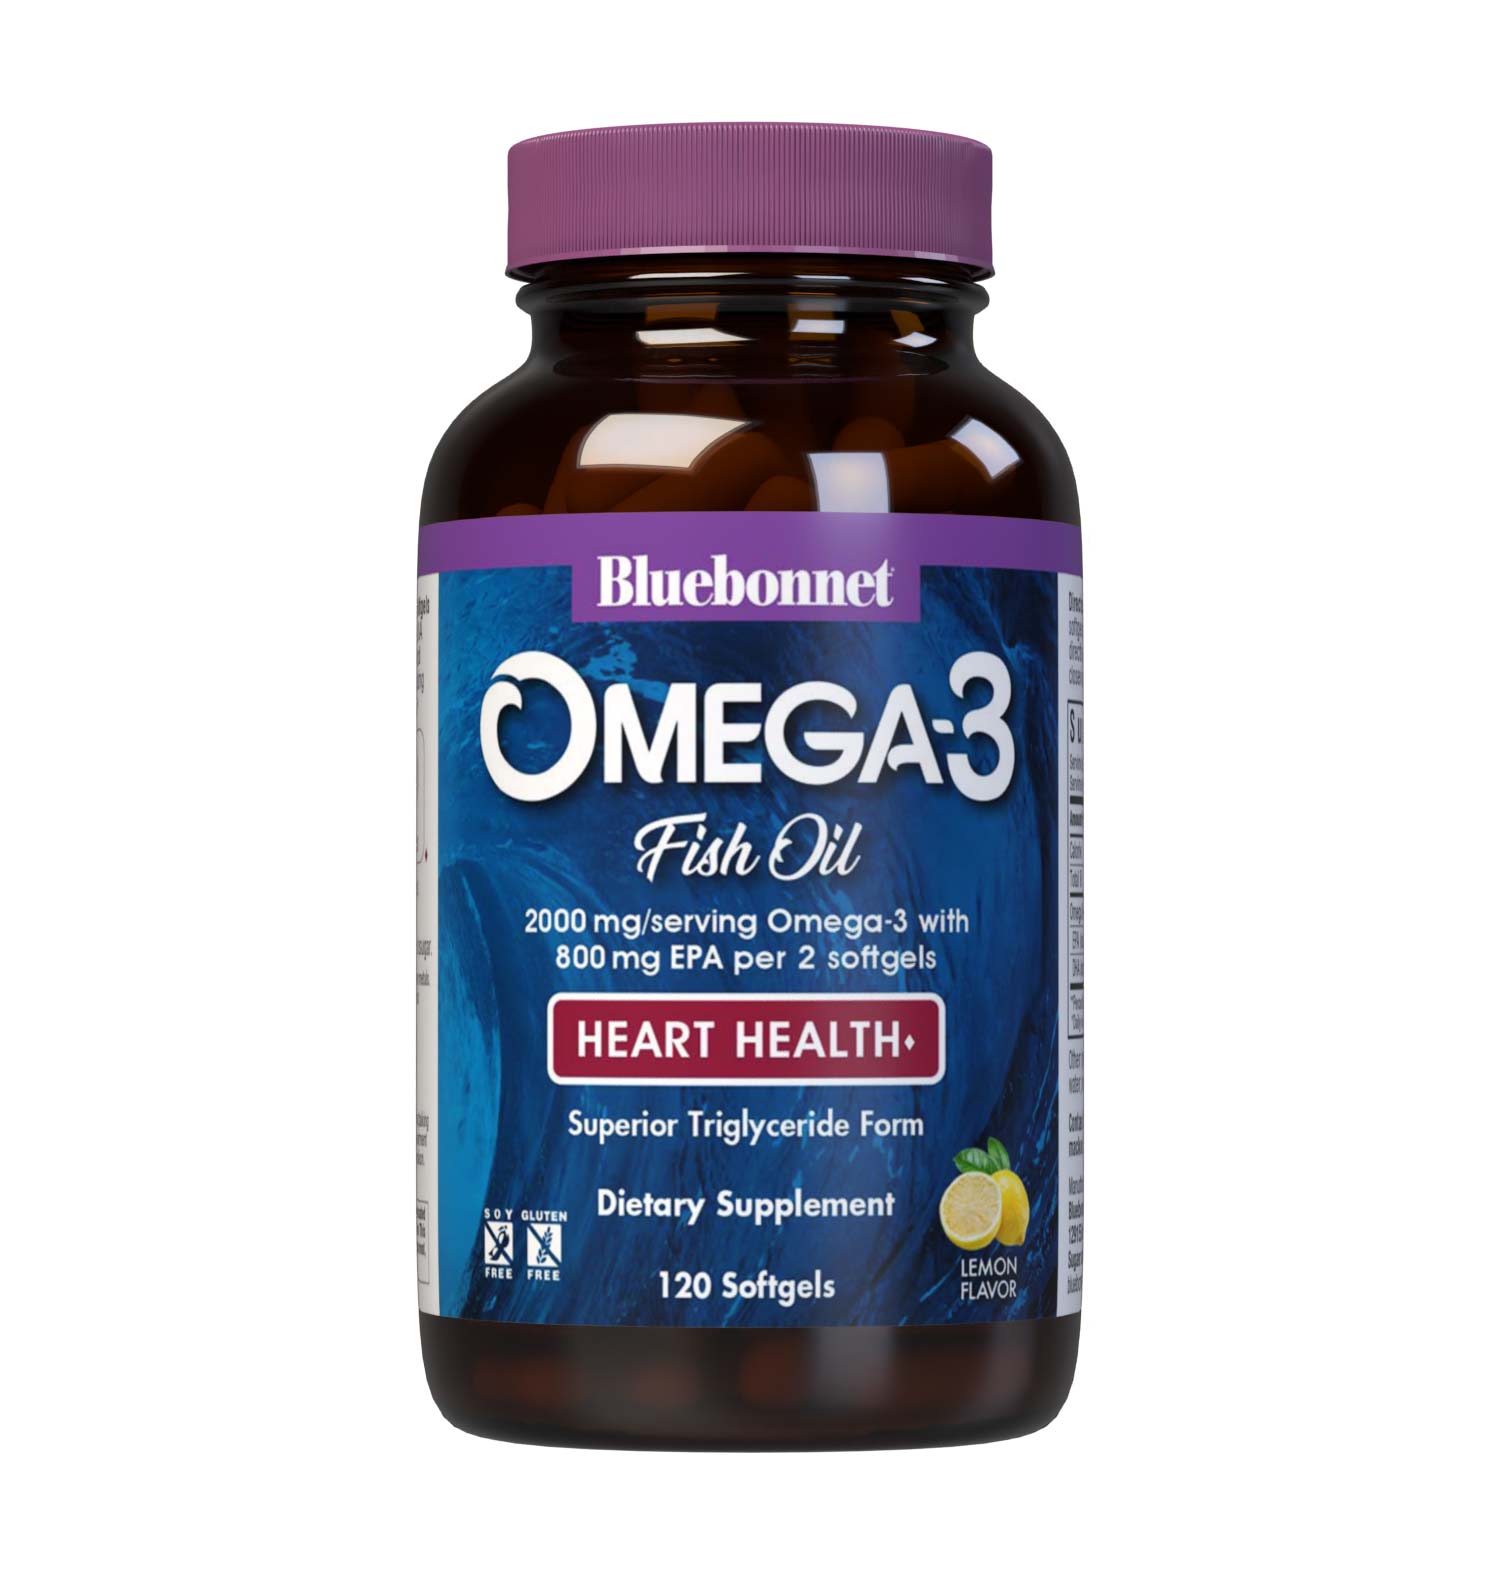 Bluebonnet’s Omega-3 Fish Oil Heart Health 120 Softgels are formulated with a specific ratio of EPA and DHA to help support heart function, blood flow, and blood pressure within the normal range by utilizing ultra-refined omega-3s from wild-caught fish. #size_120 count